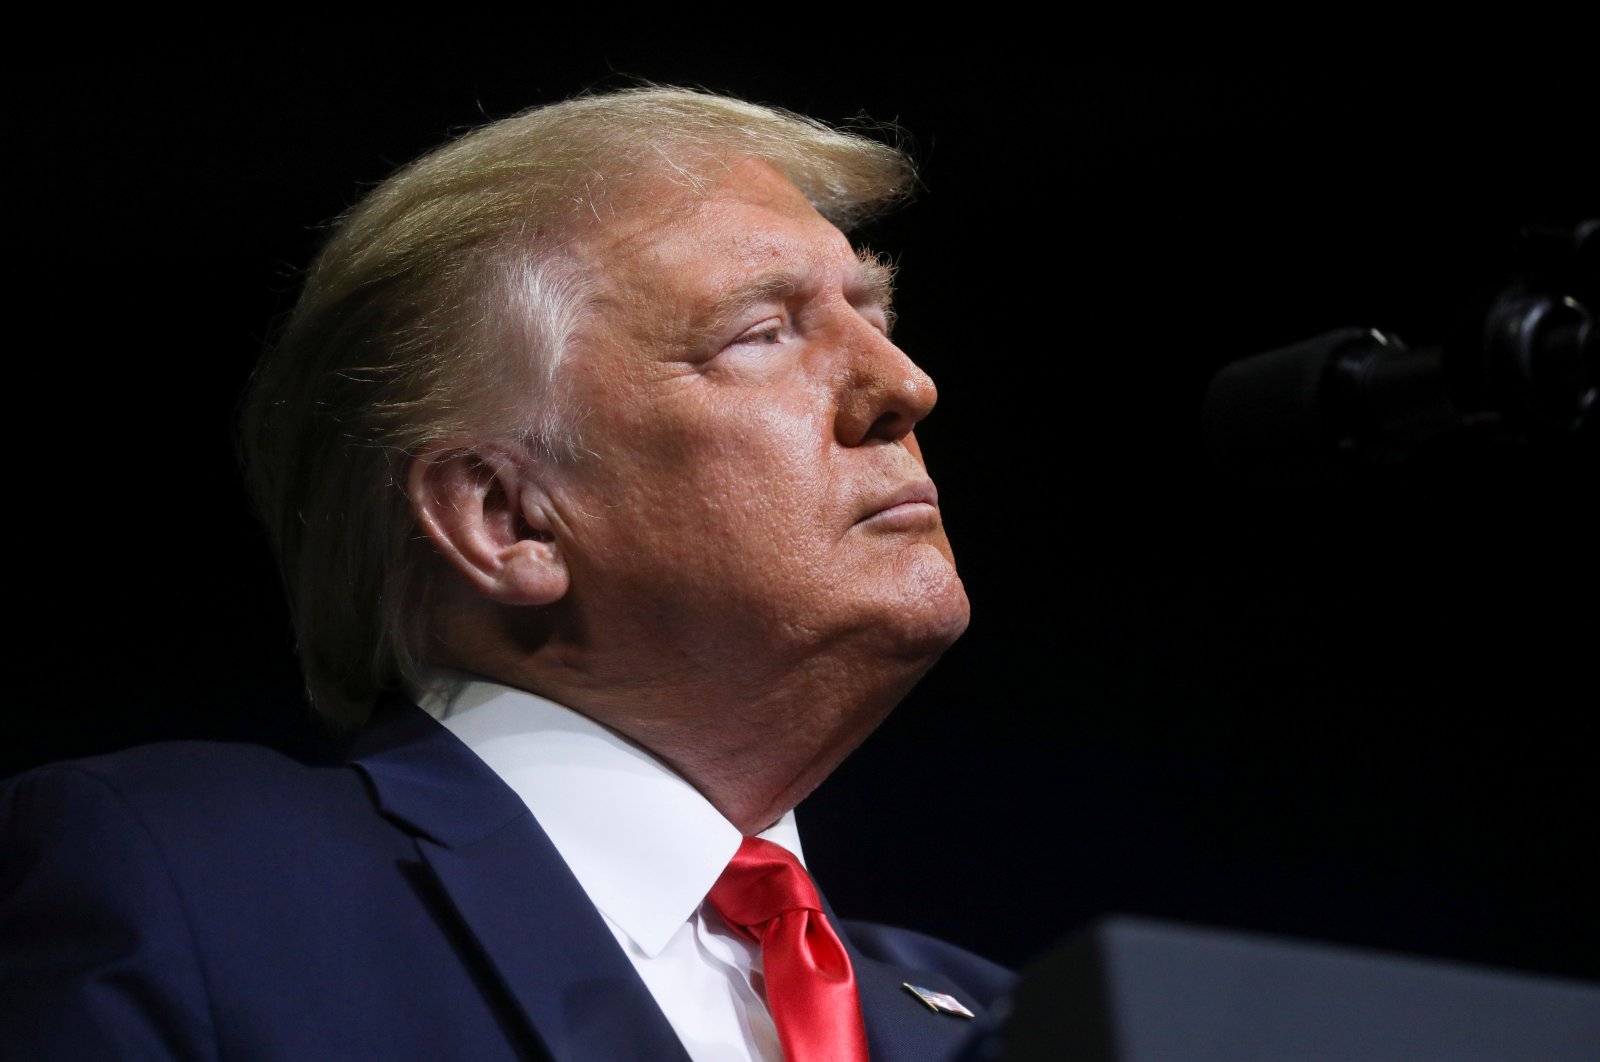 U.S. President Donald Trump pauses as he addresses his first reelection campaign rally in several months in the midst of the coronavirus pandemic at the BOK Center in Tulsa, Oklahoma, U.S., June 20, 2020. (Reuters Photo)